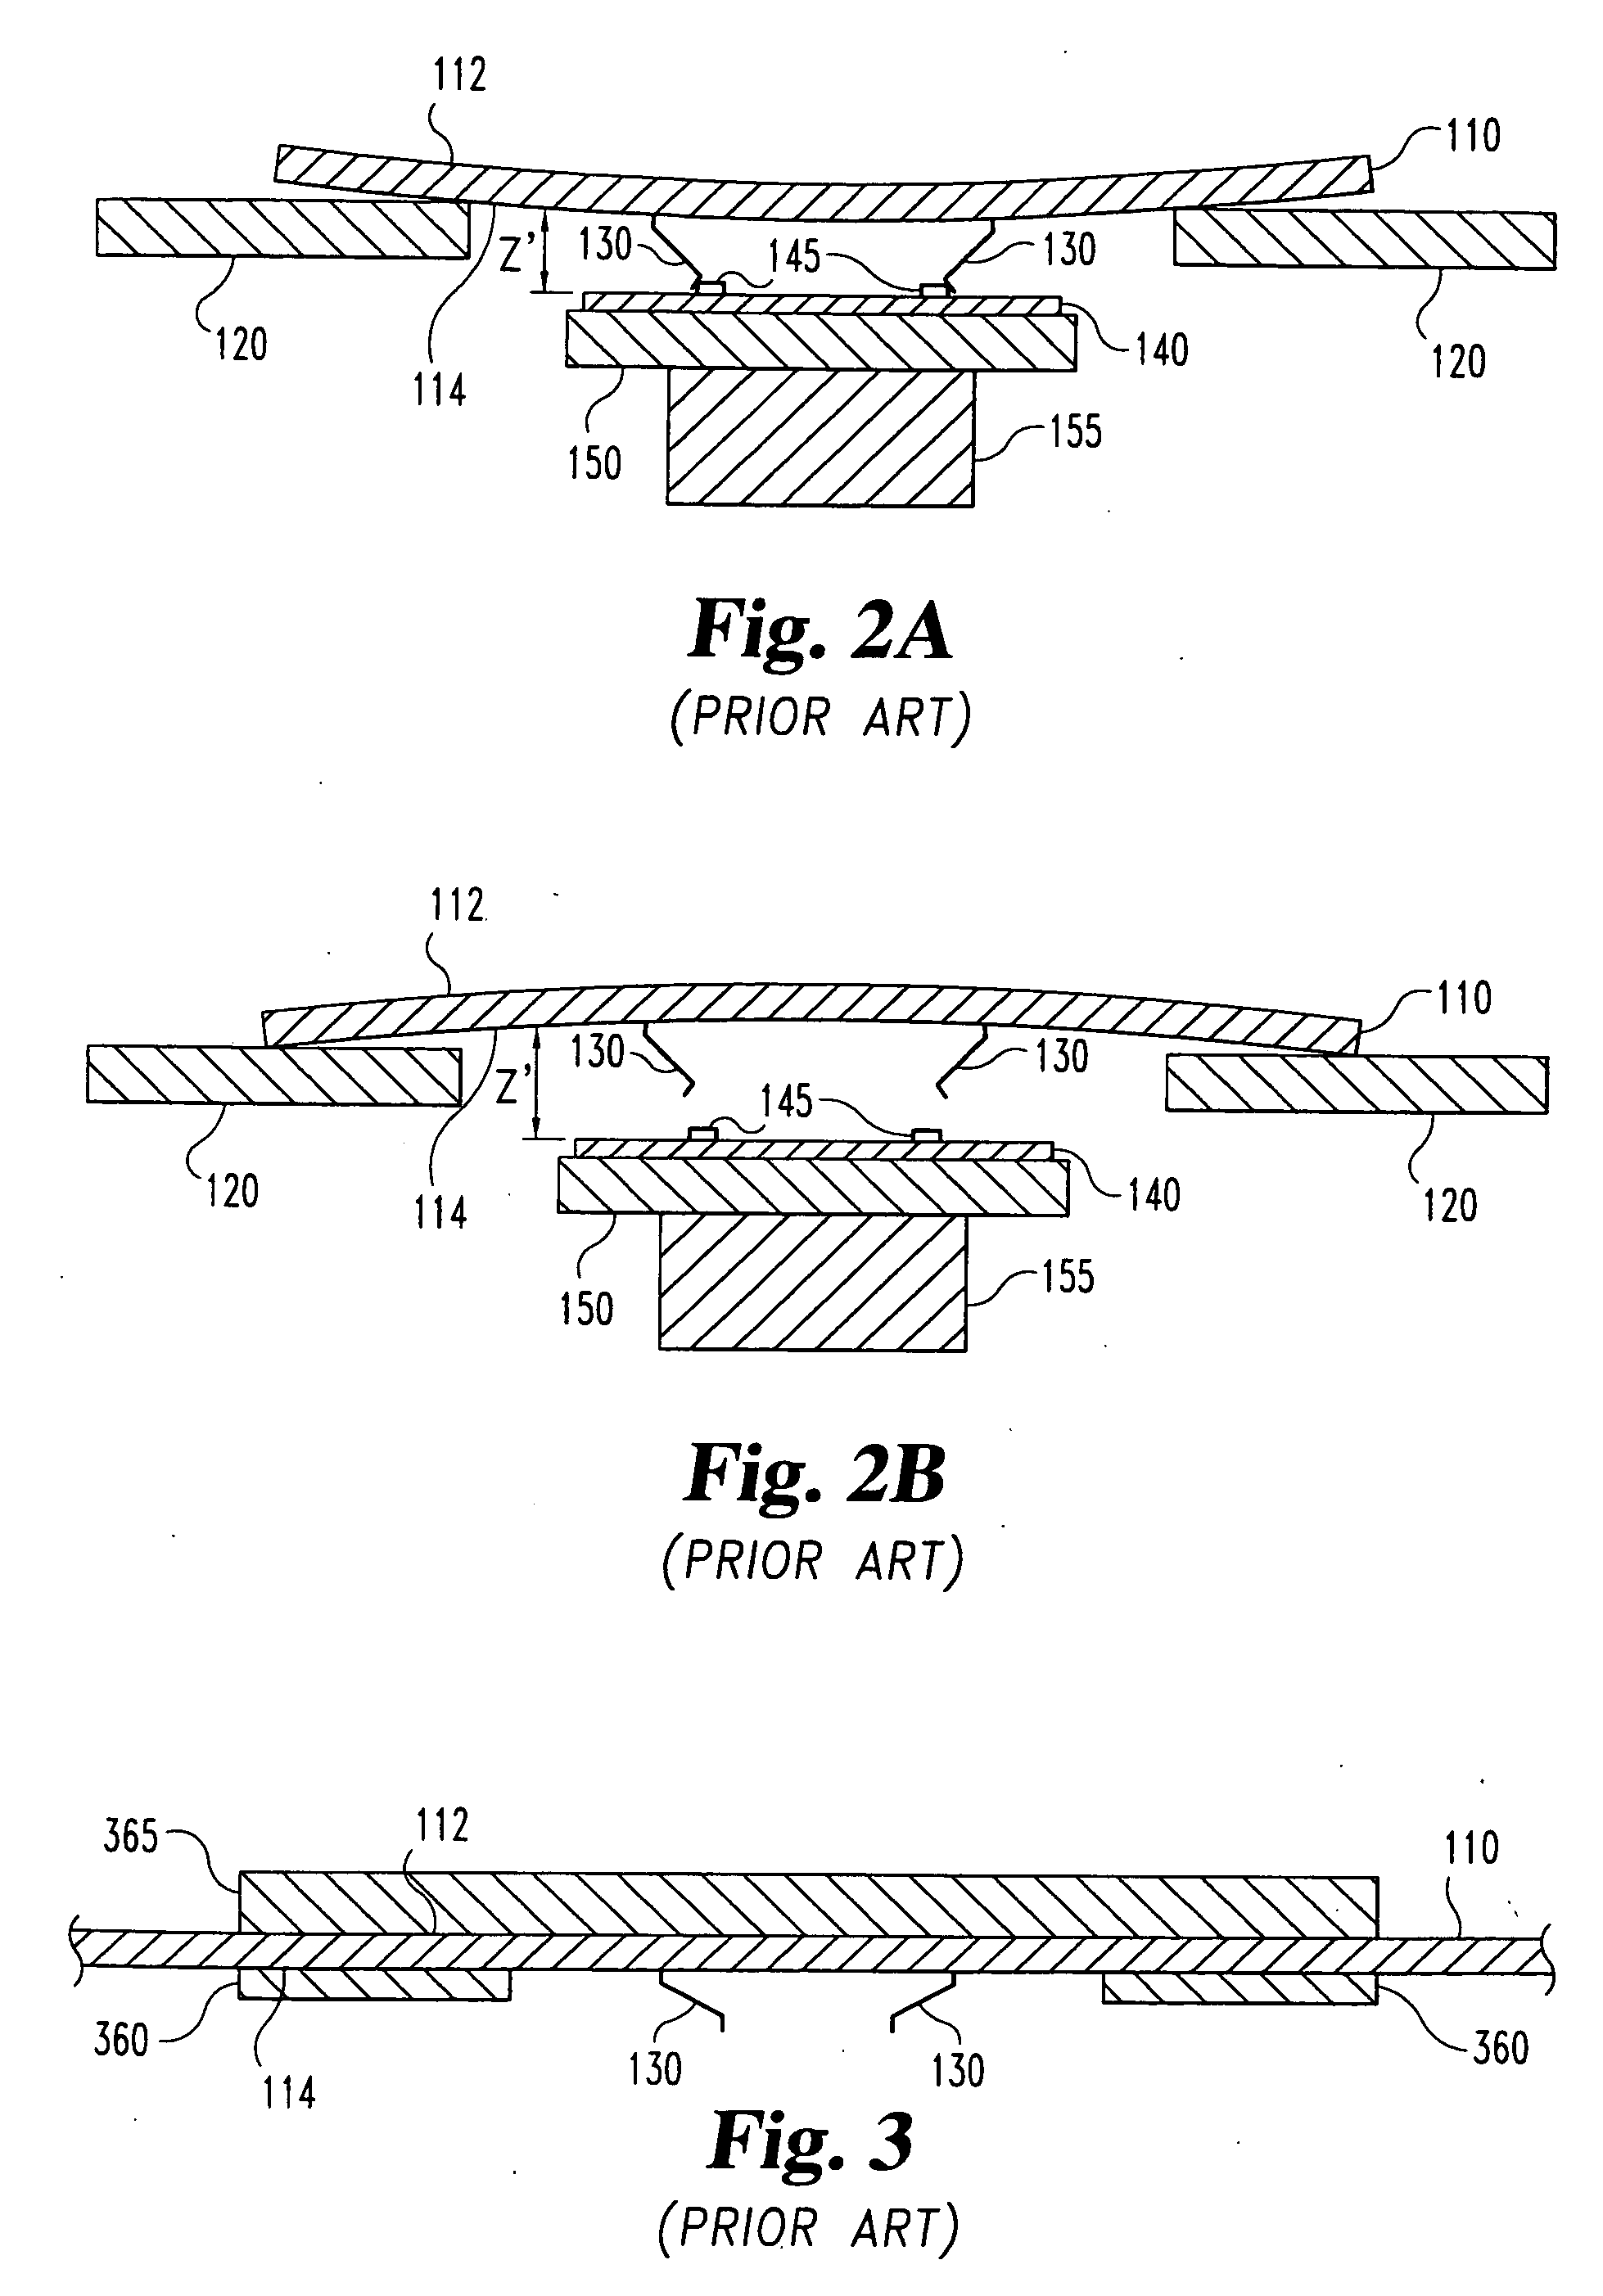 Method and system for compensating thermally induced motion of probe cards